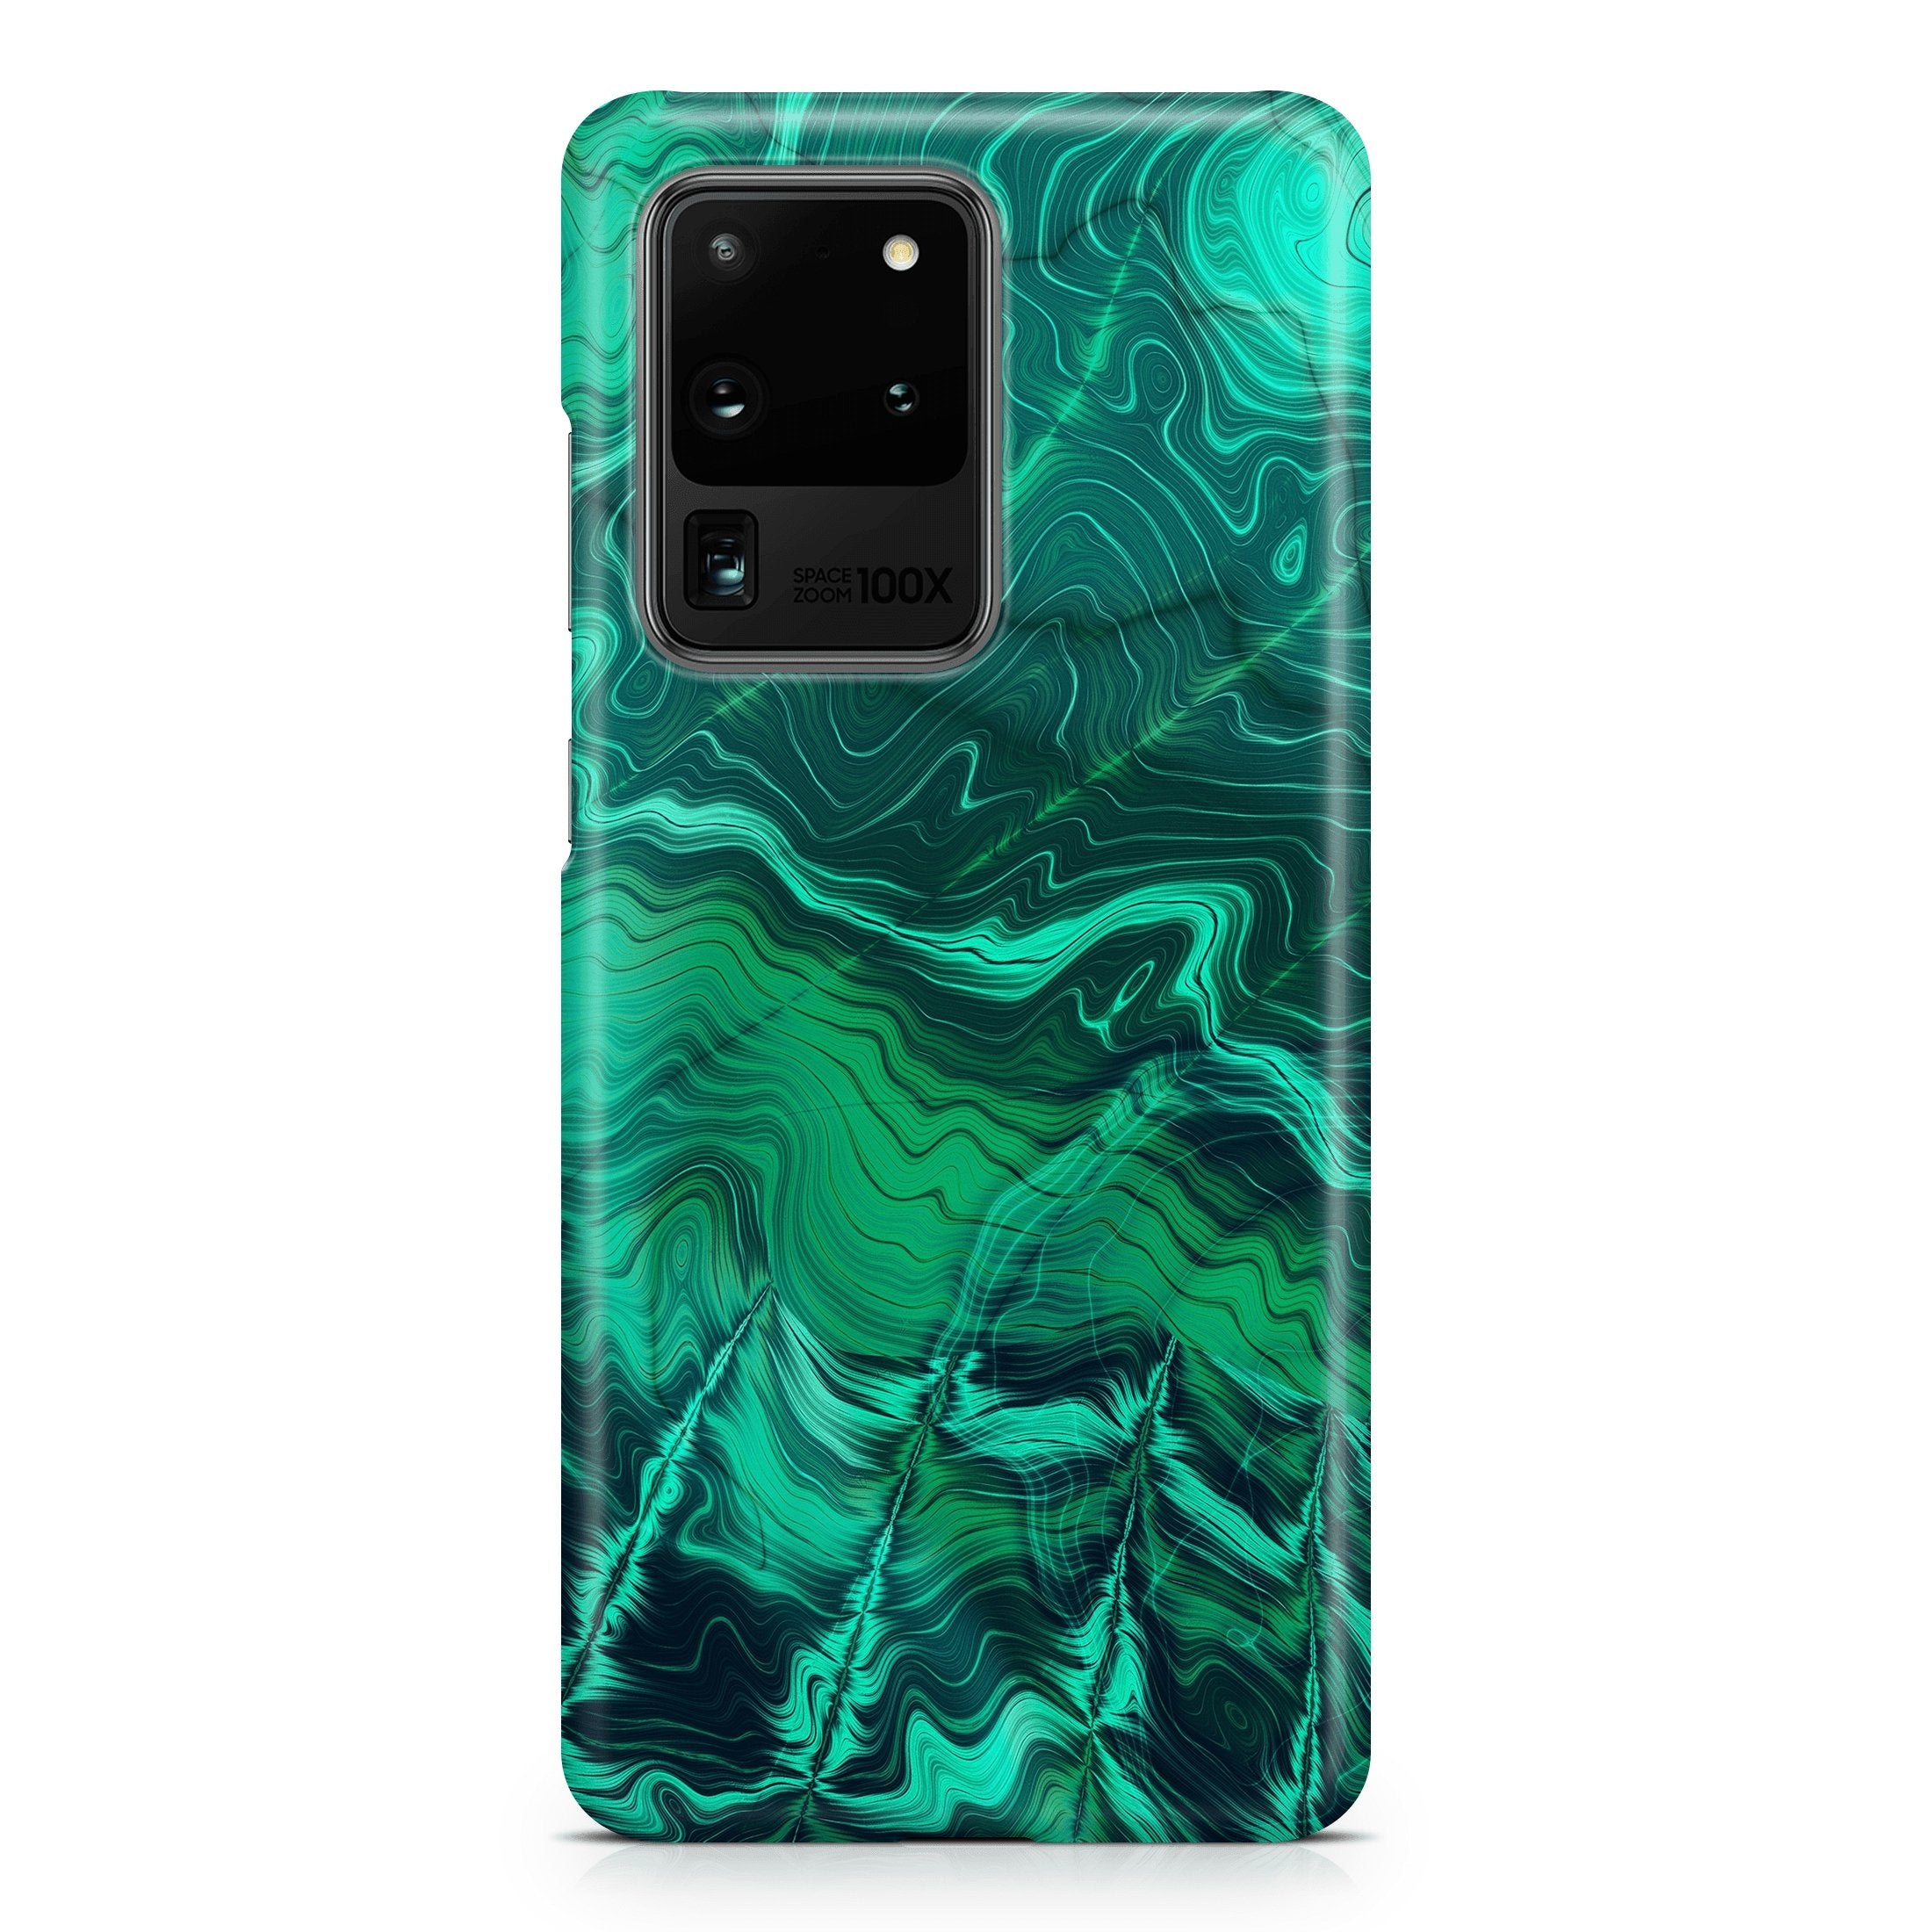 Malachite III - Samsung phone case designs by CaseSwagger